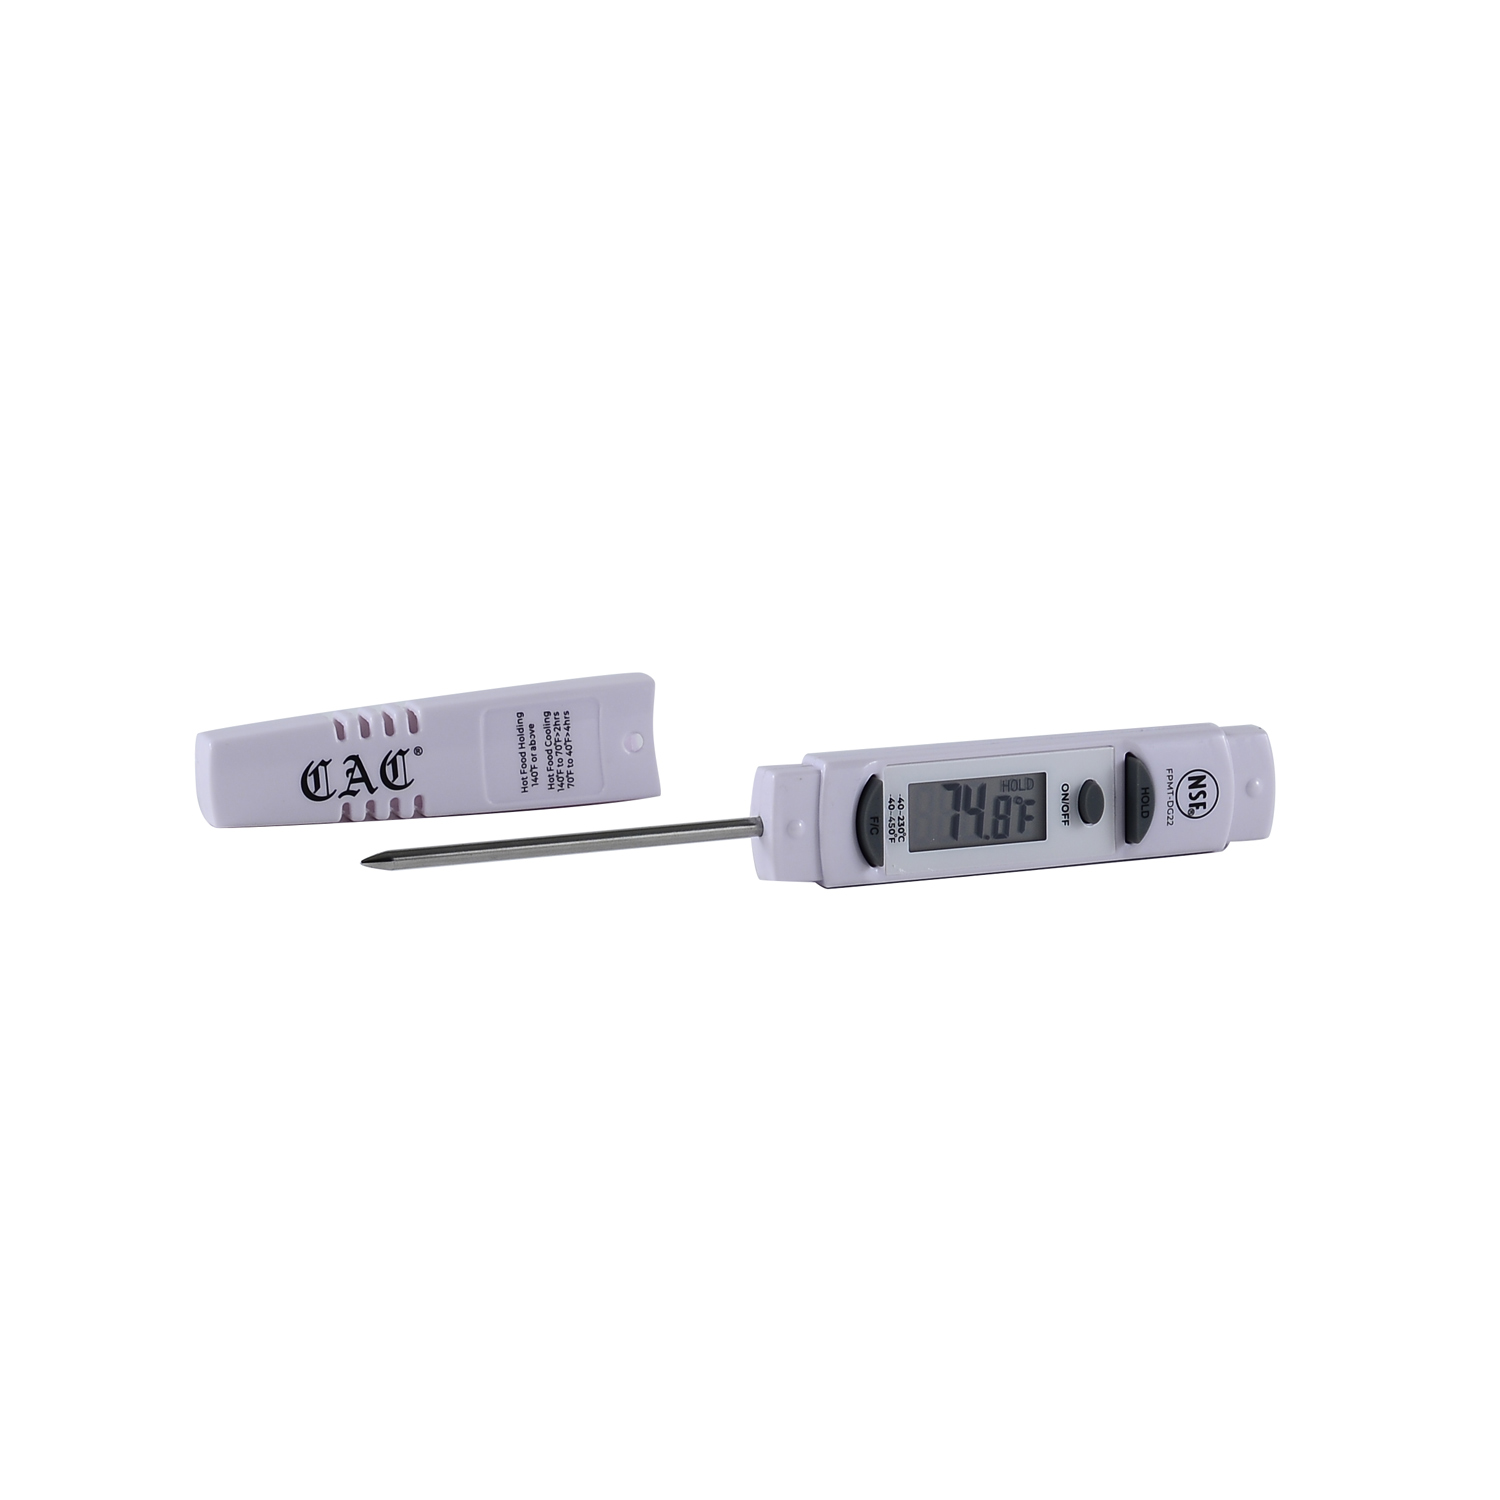 CAC China FPMT-DG22 Equil Thermo Digital Instant Read Thermometer with Hold Function